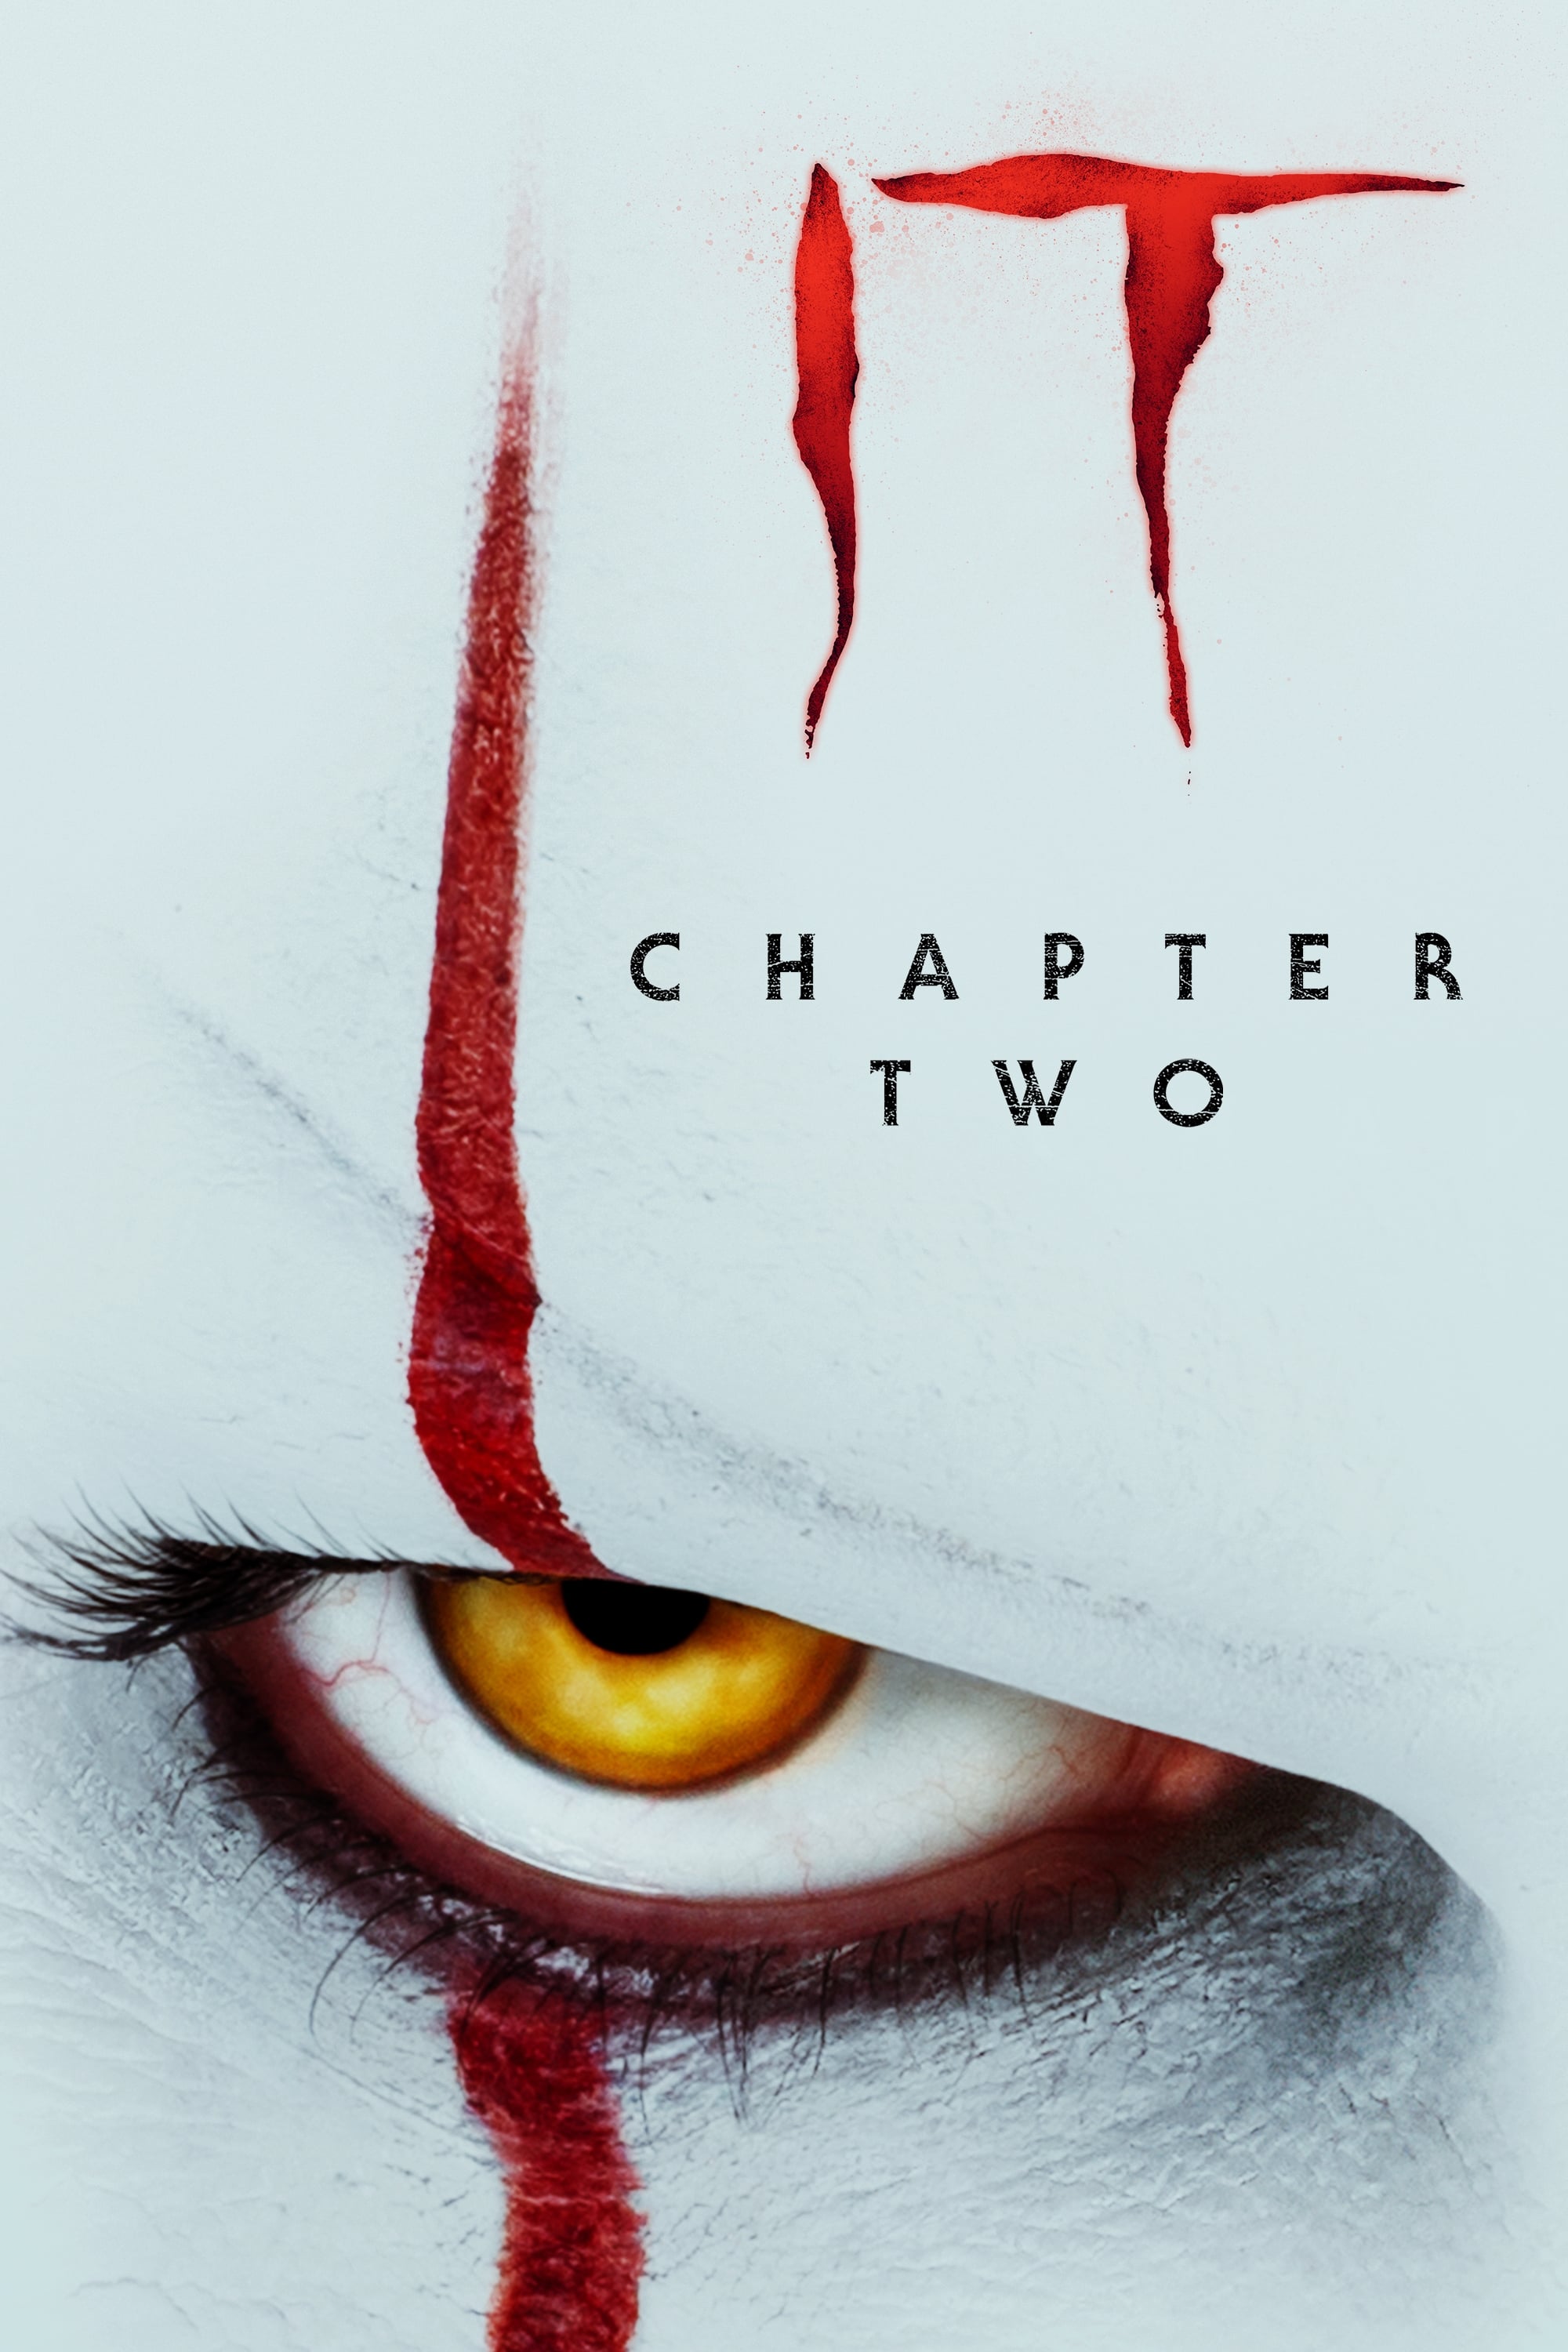 movie review it chapter 2